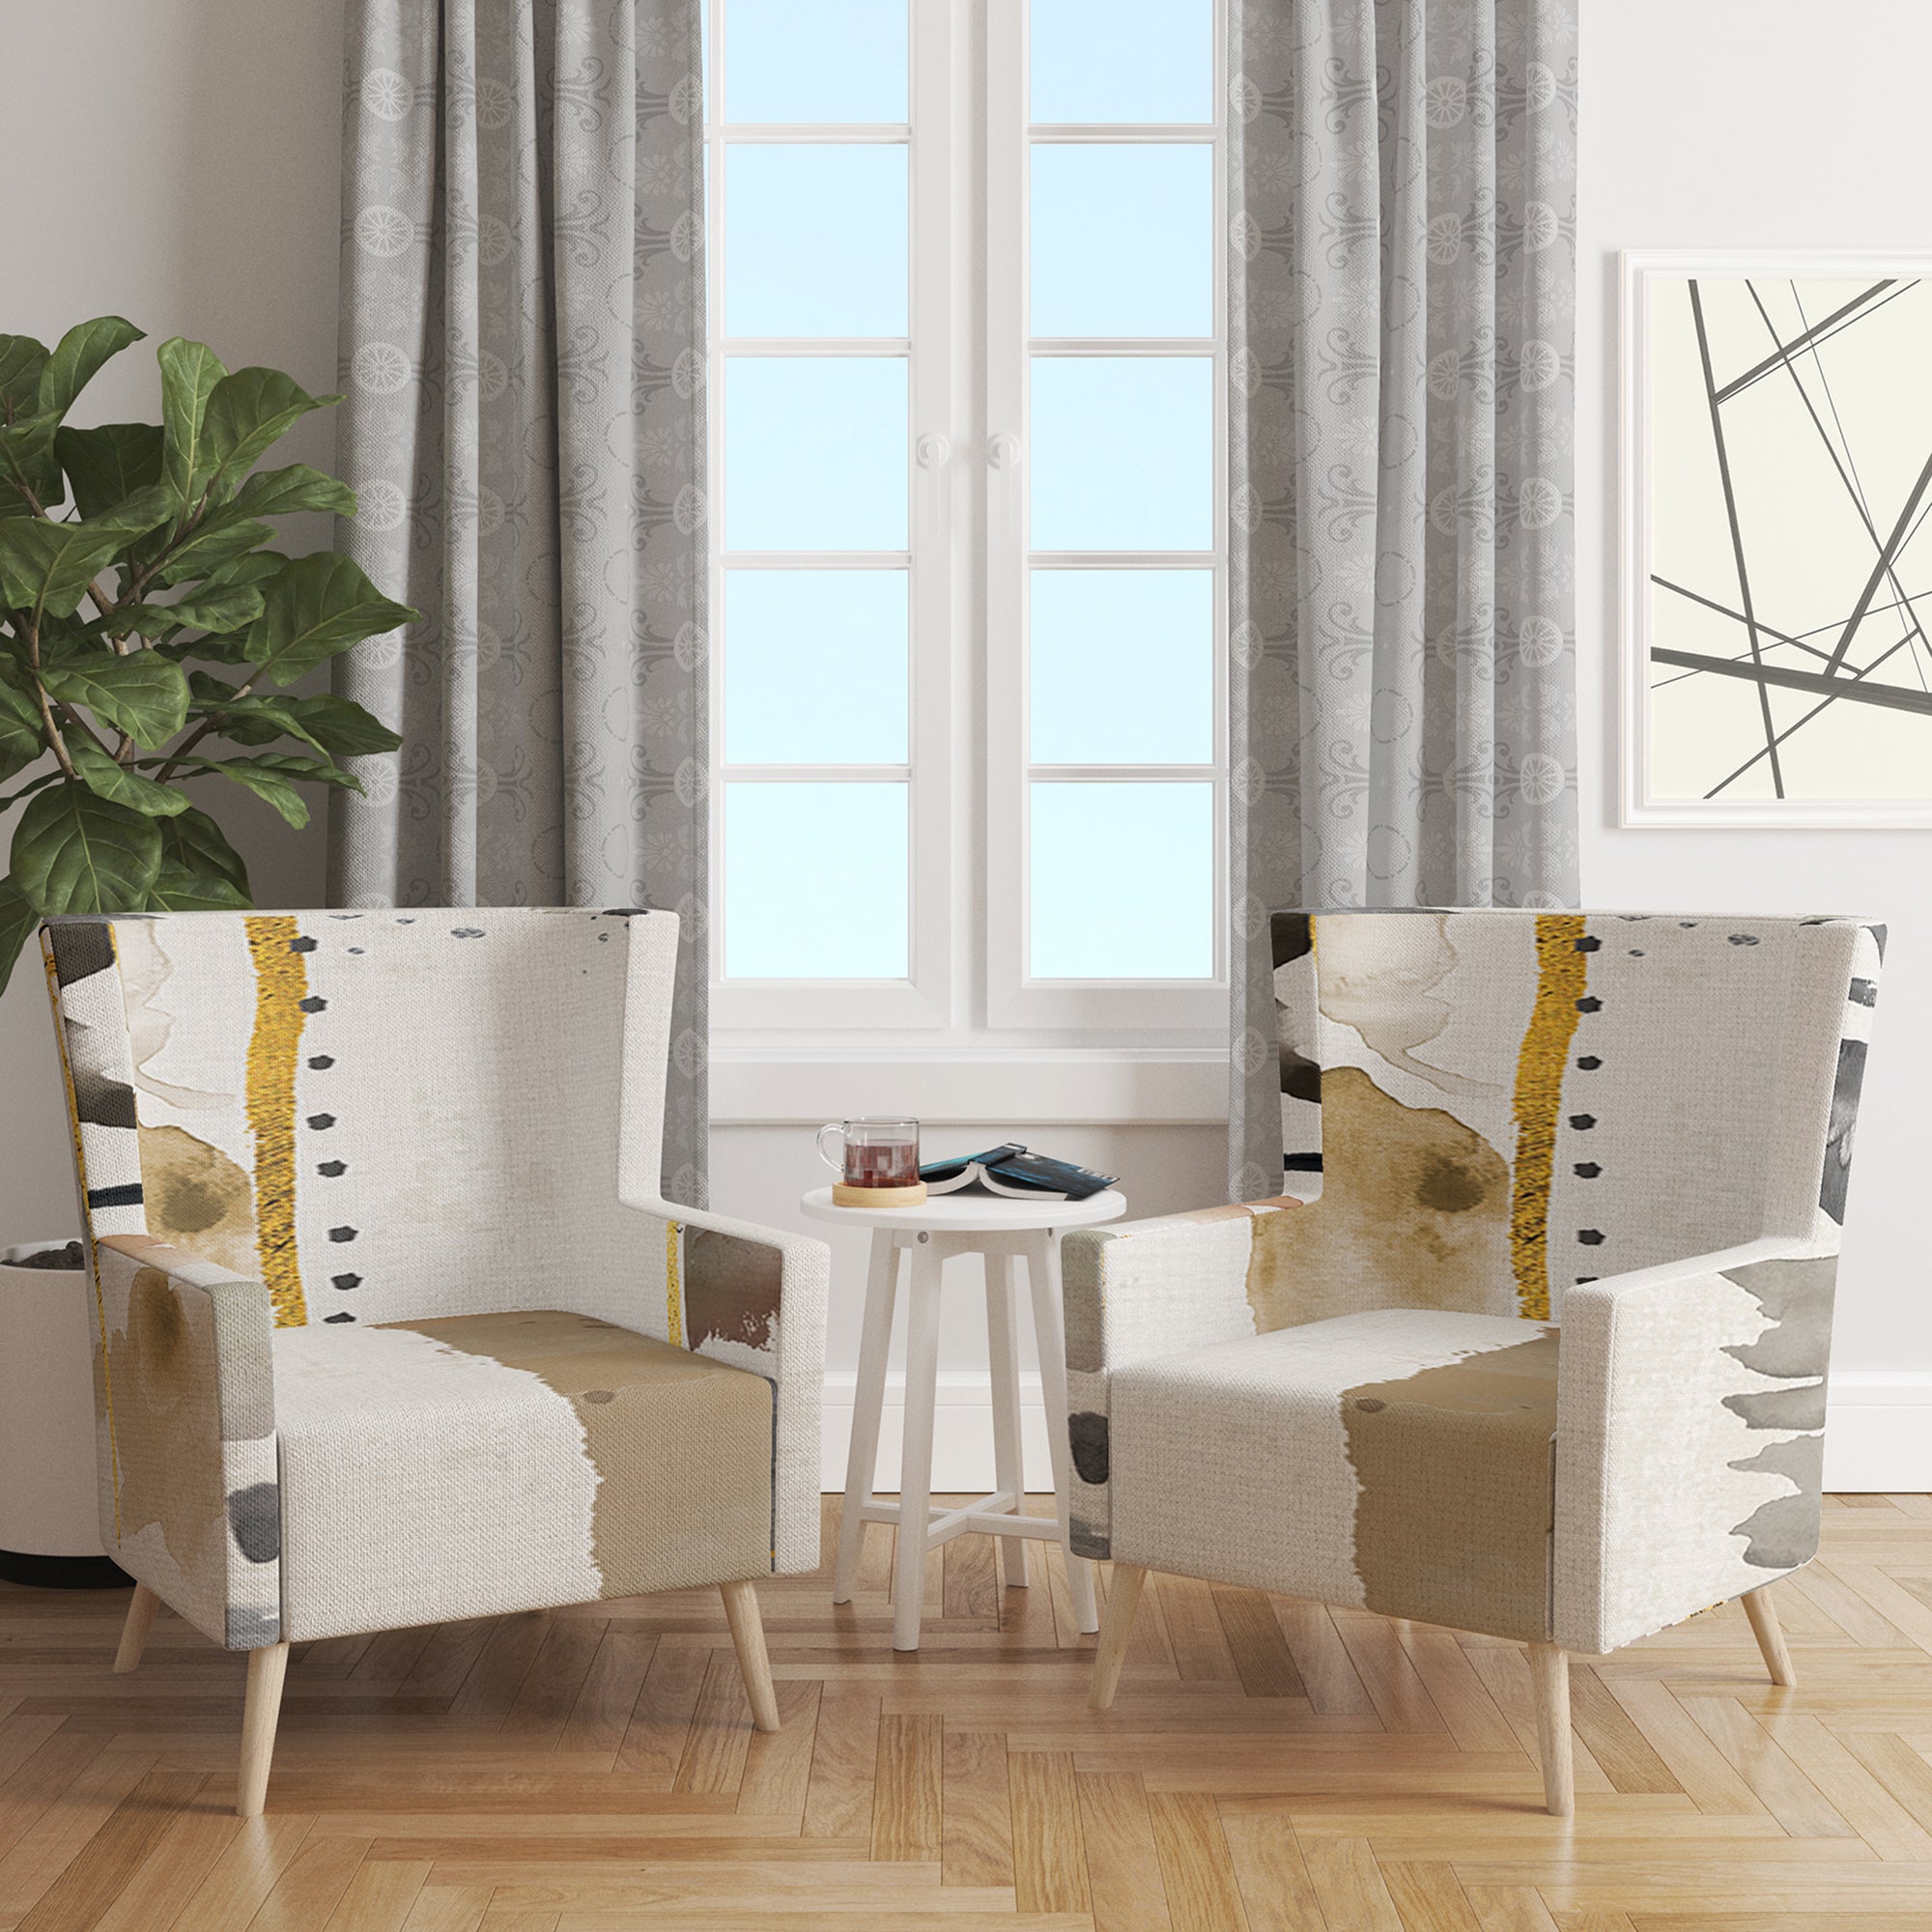 Designart 'Abstract Gold Birch Trees I' Modern Accent Chair